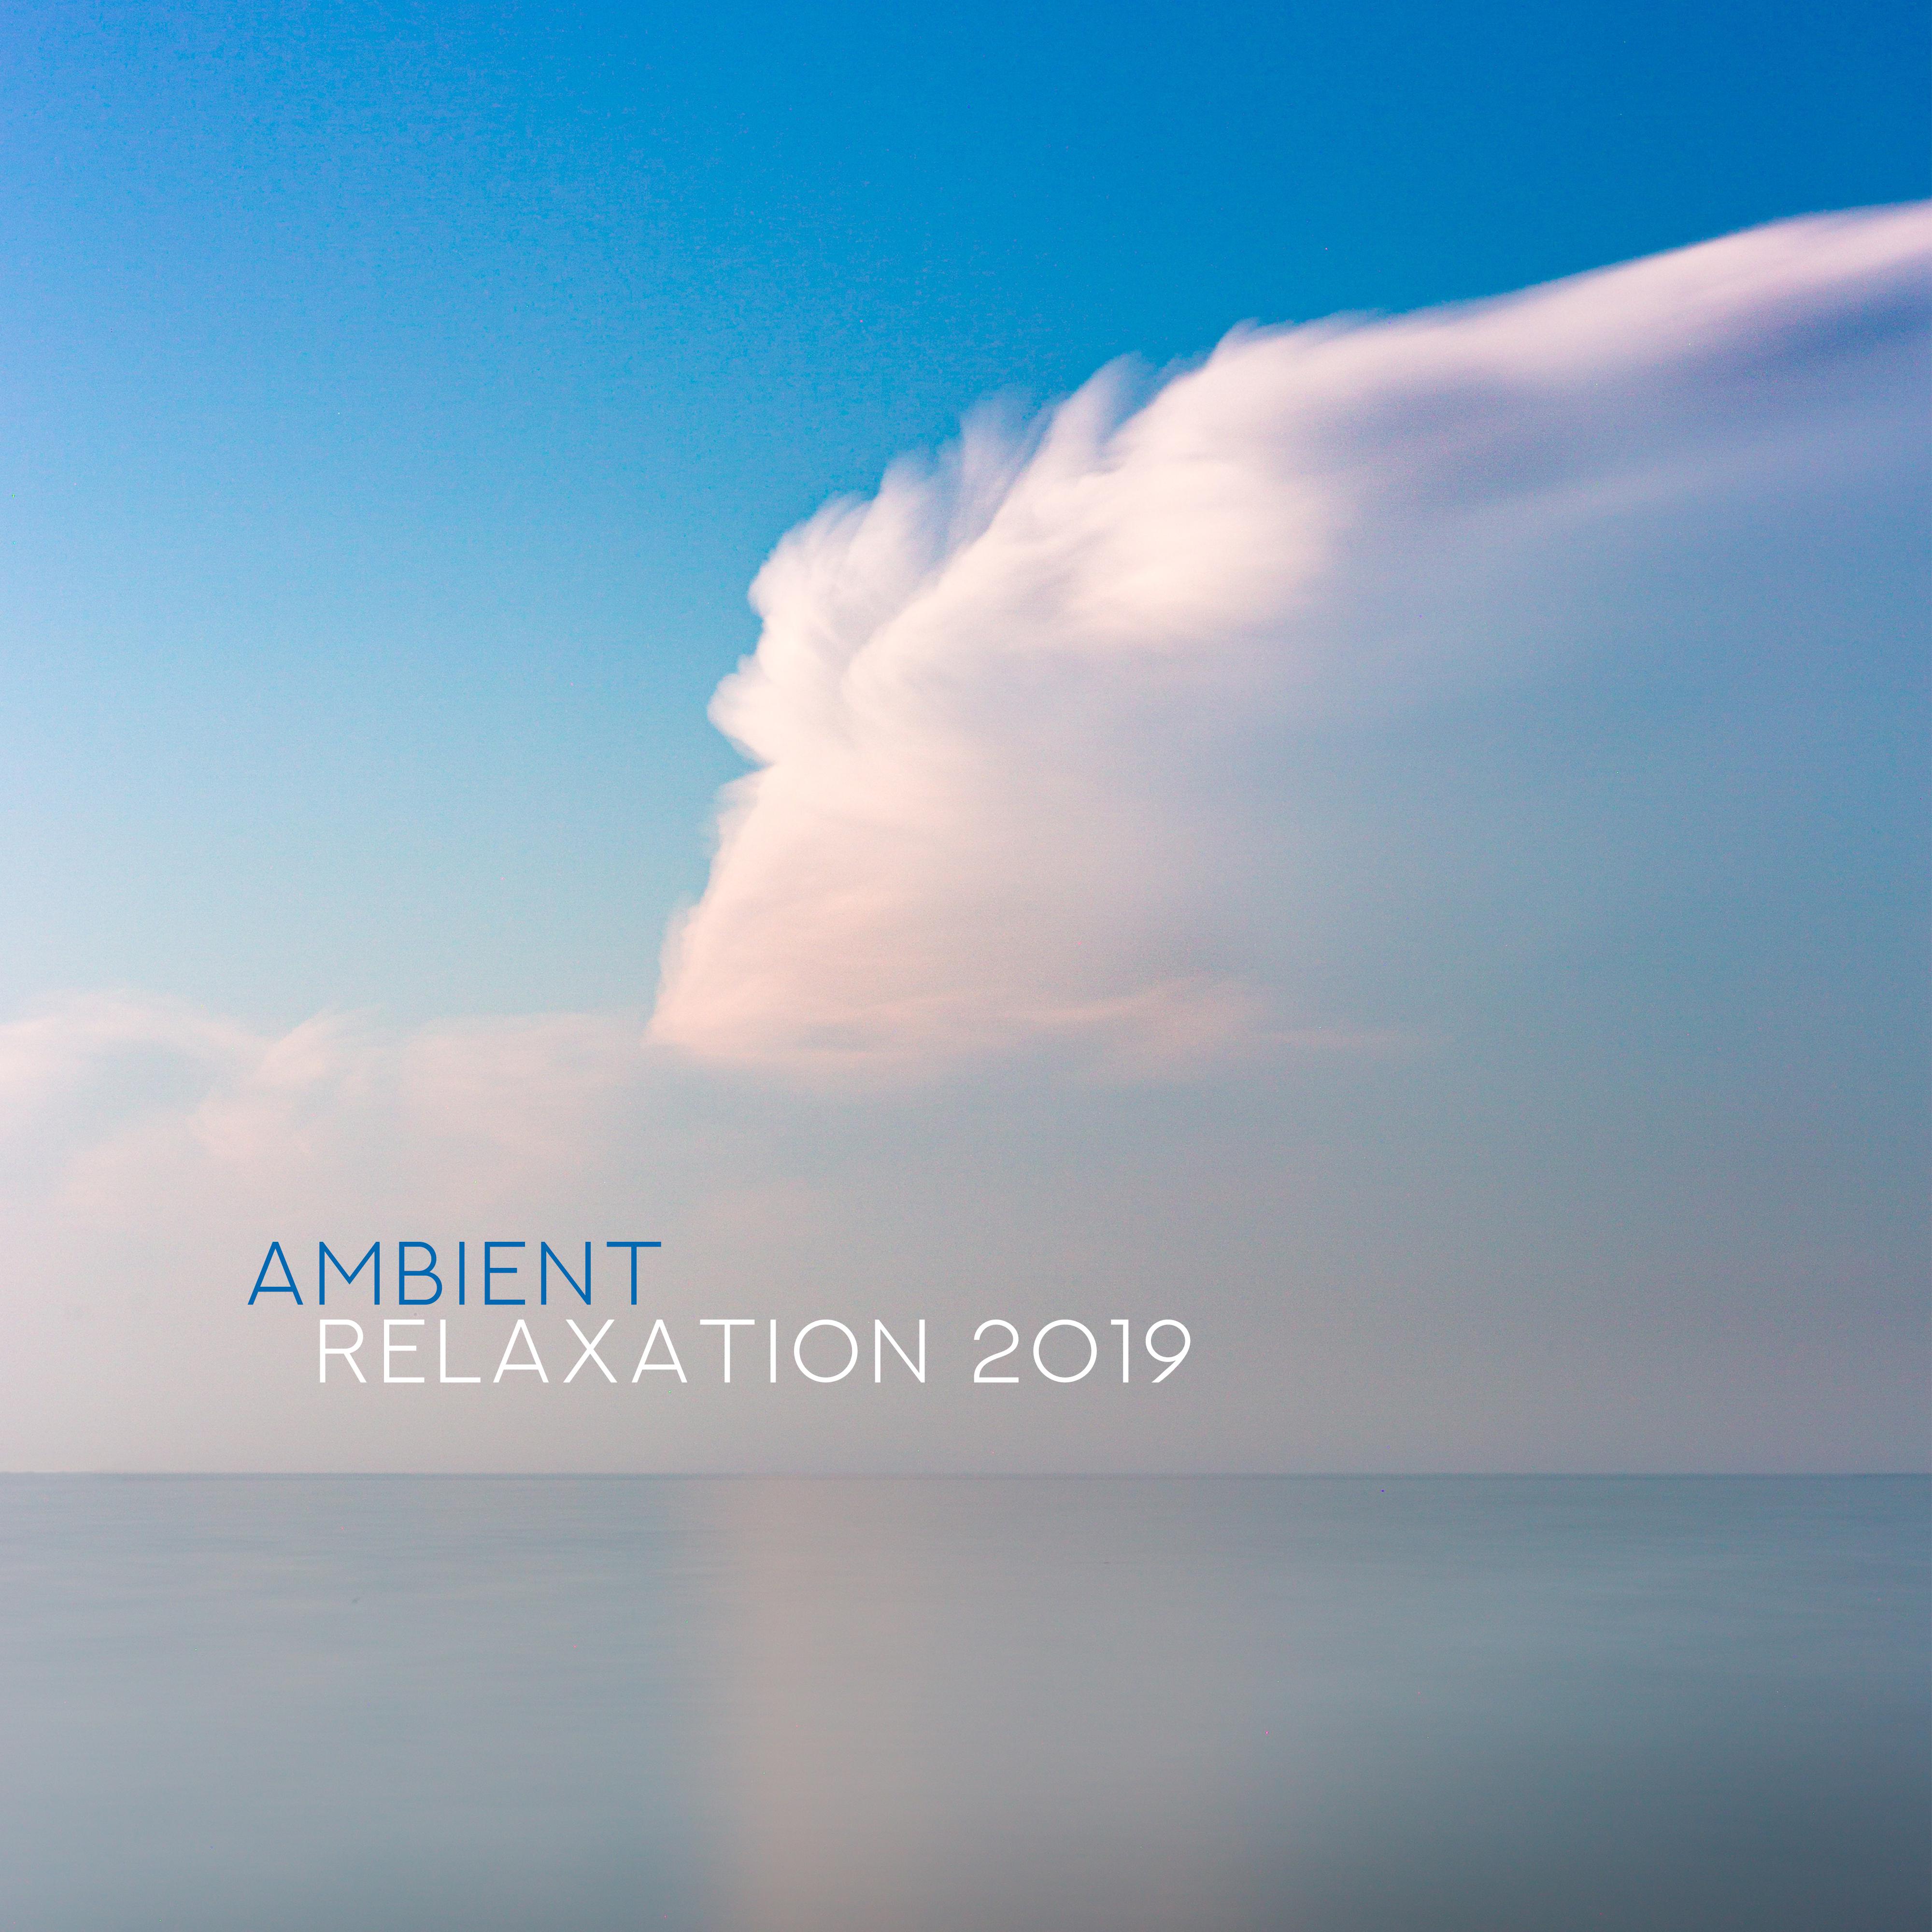 Ambient Relaxation 2019 – Relaxing Music for Meditation, Spa, Massage, Yoga, Sleep, Deep Harmony, Calm Down, Lounge